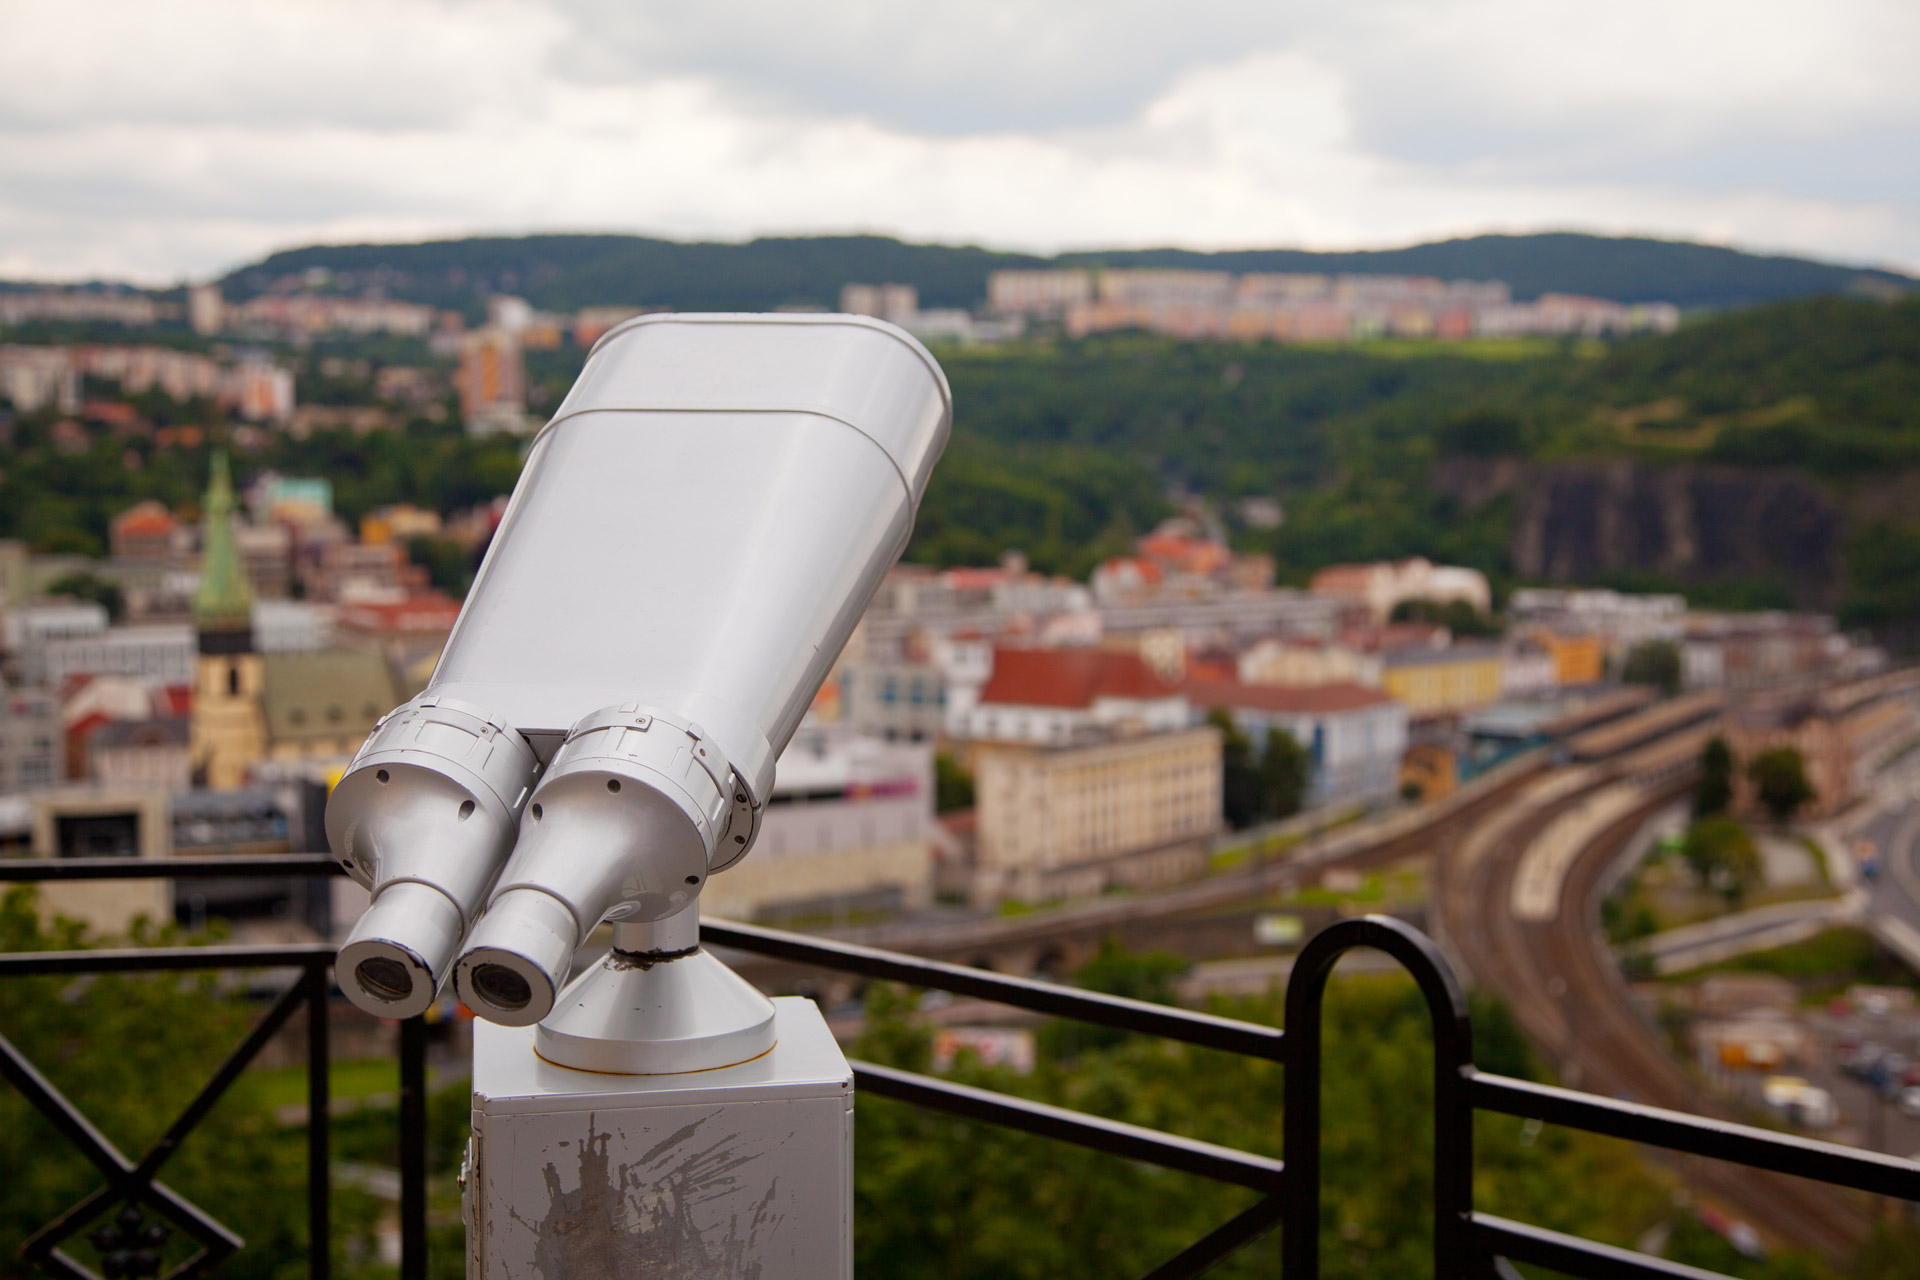 sightseeing telescope with a town view